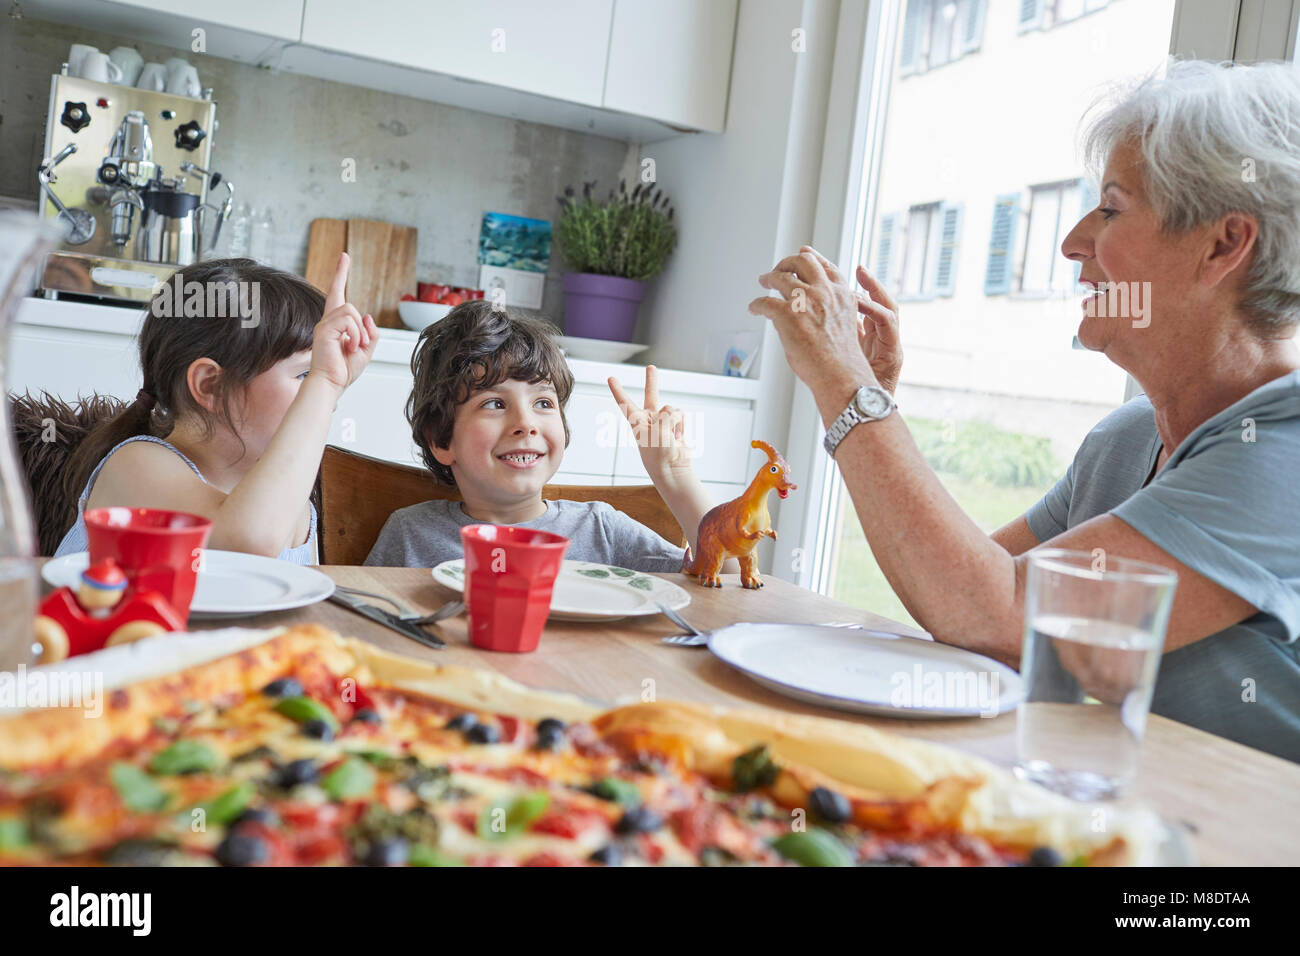 Grandmother and grandchildren sitting at table, grandmother photographing children Stock Photo